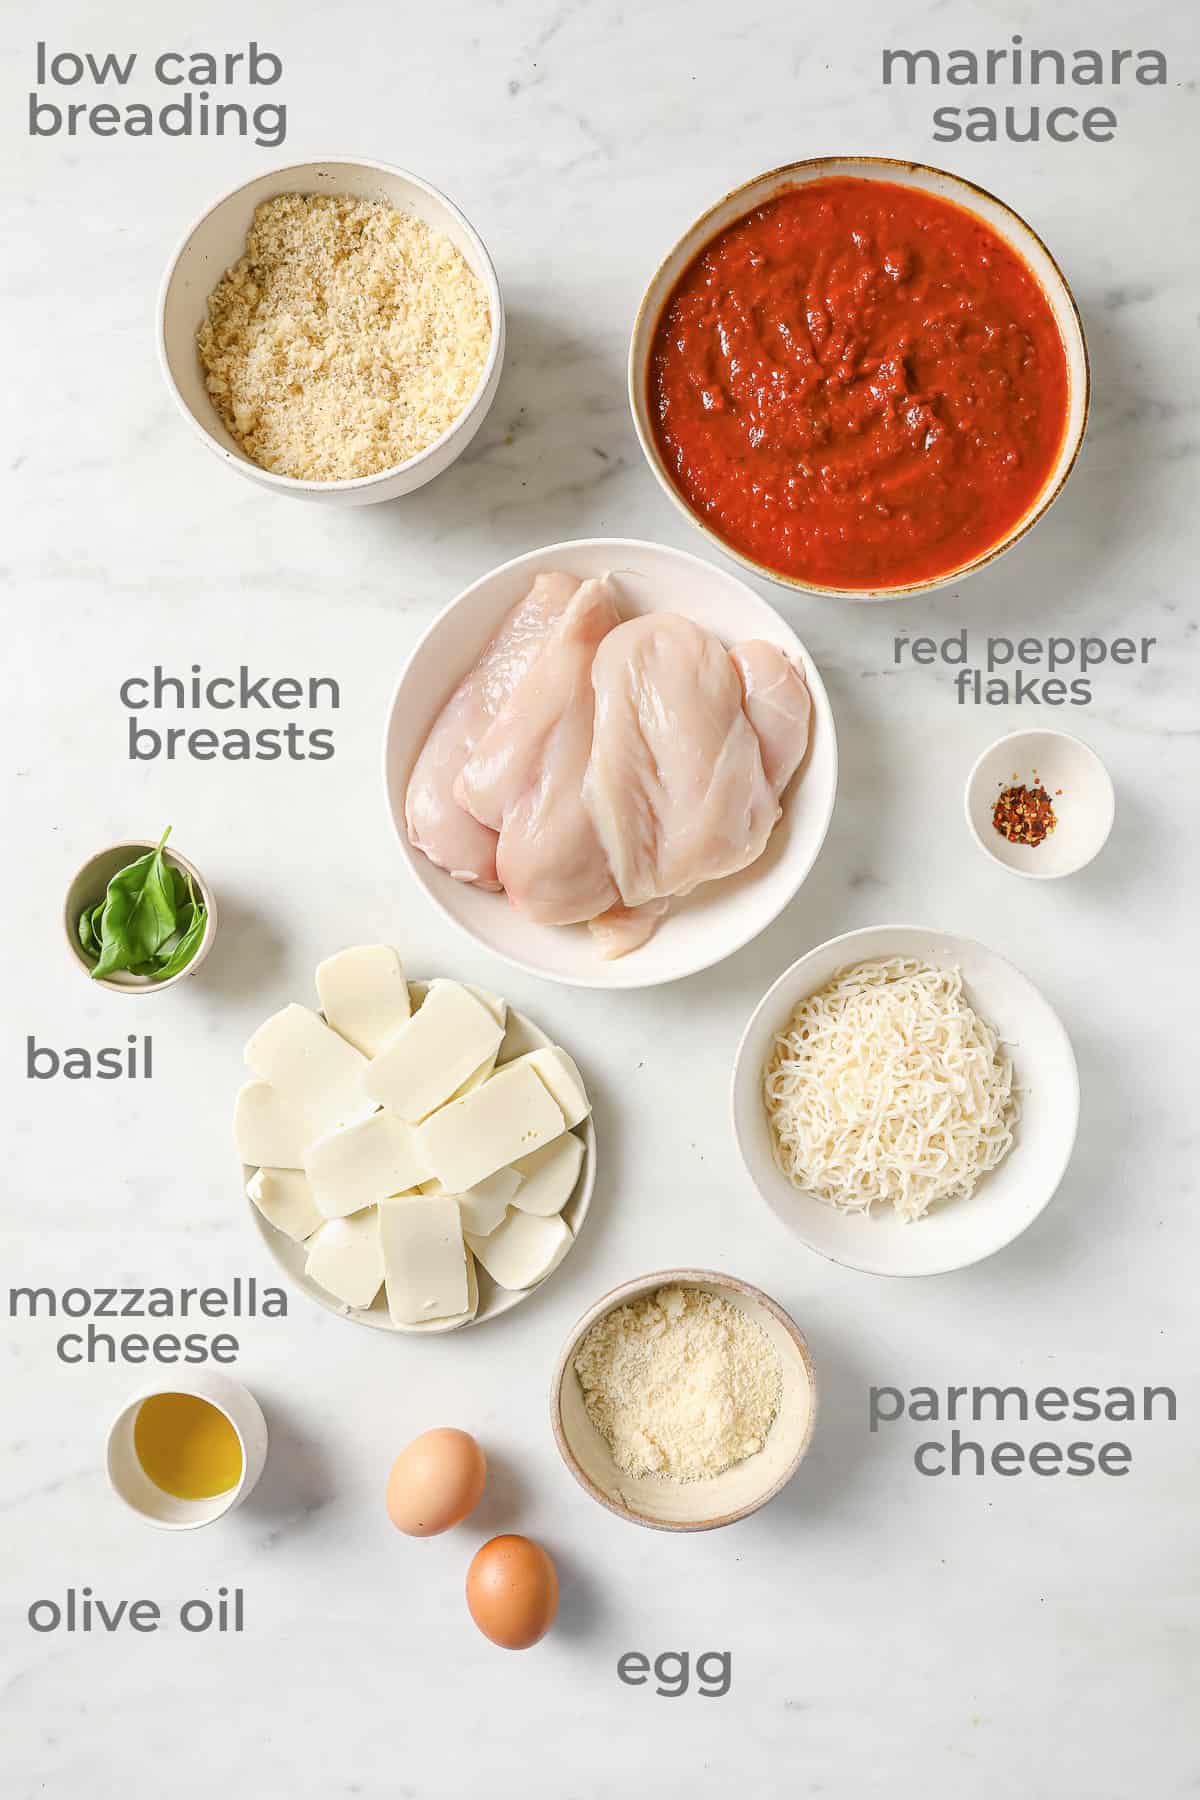 Ingredients laid out to make a low carb chicken parmigiana - chicken, marinara, cheese, basil, breading, egg, and olive oil.